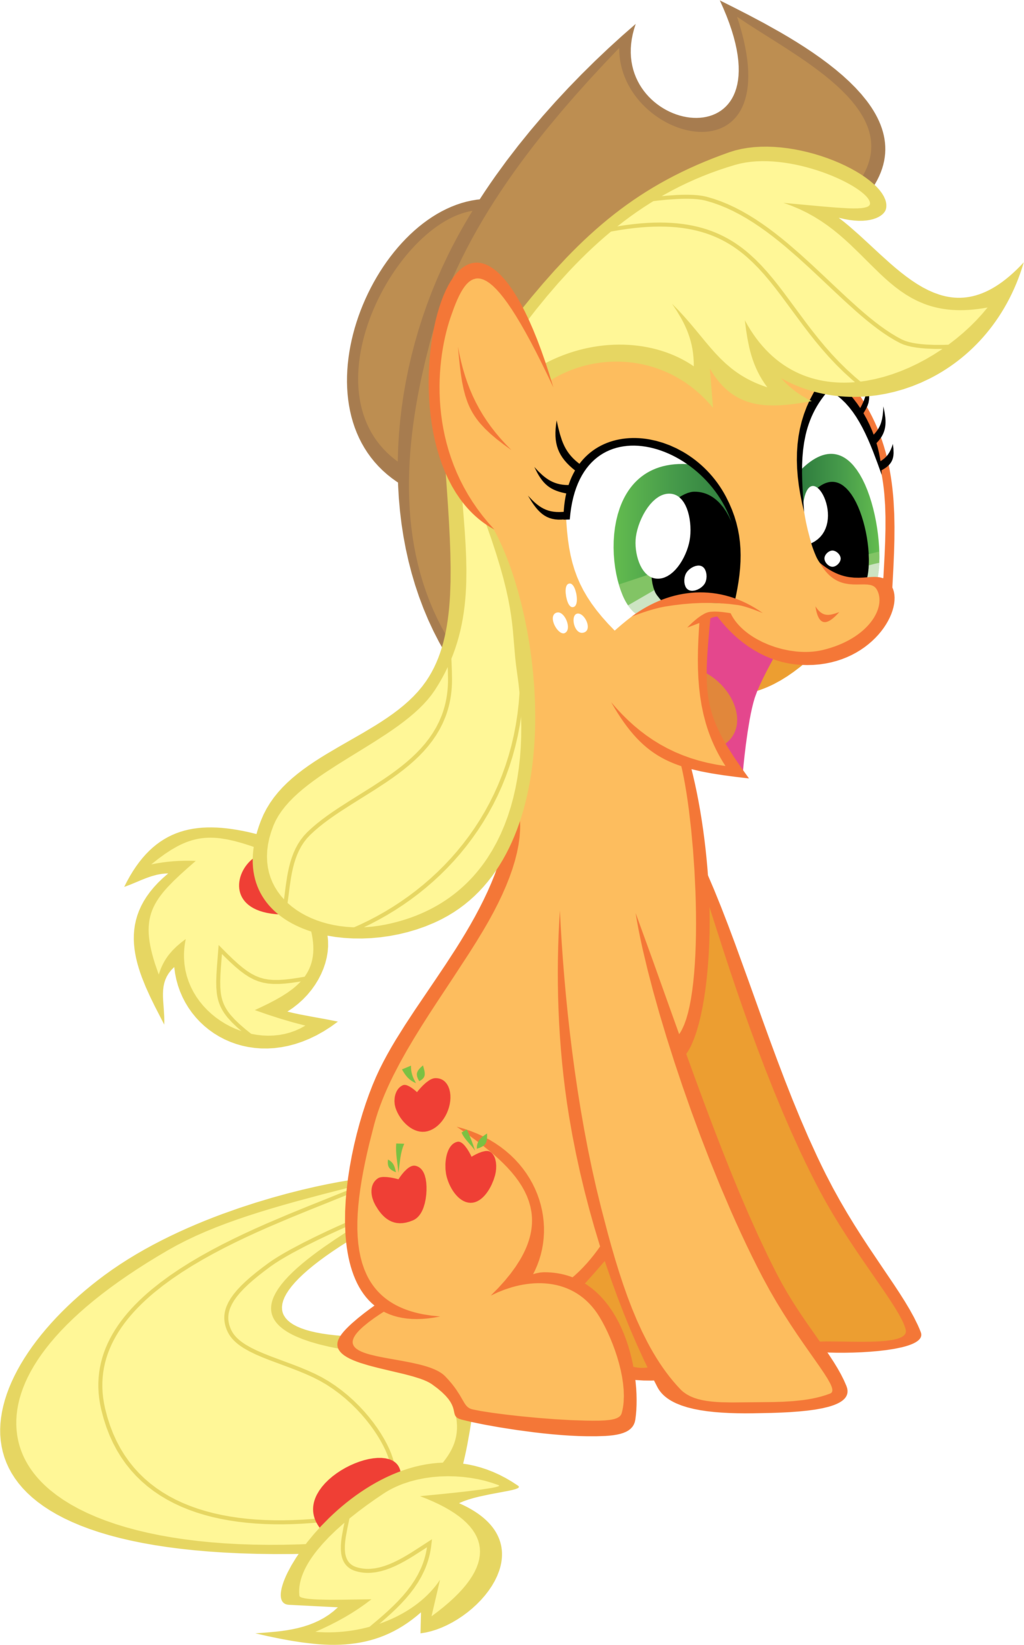 applejack___the_earth_pony_by_blindcaves